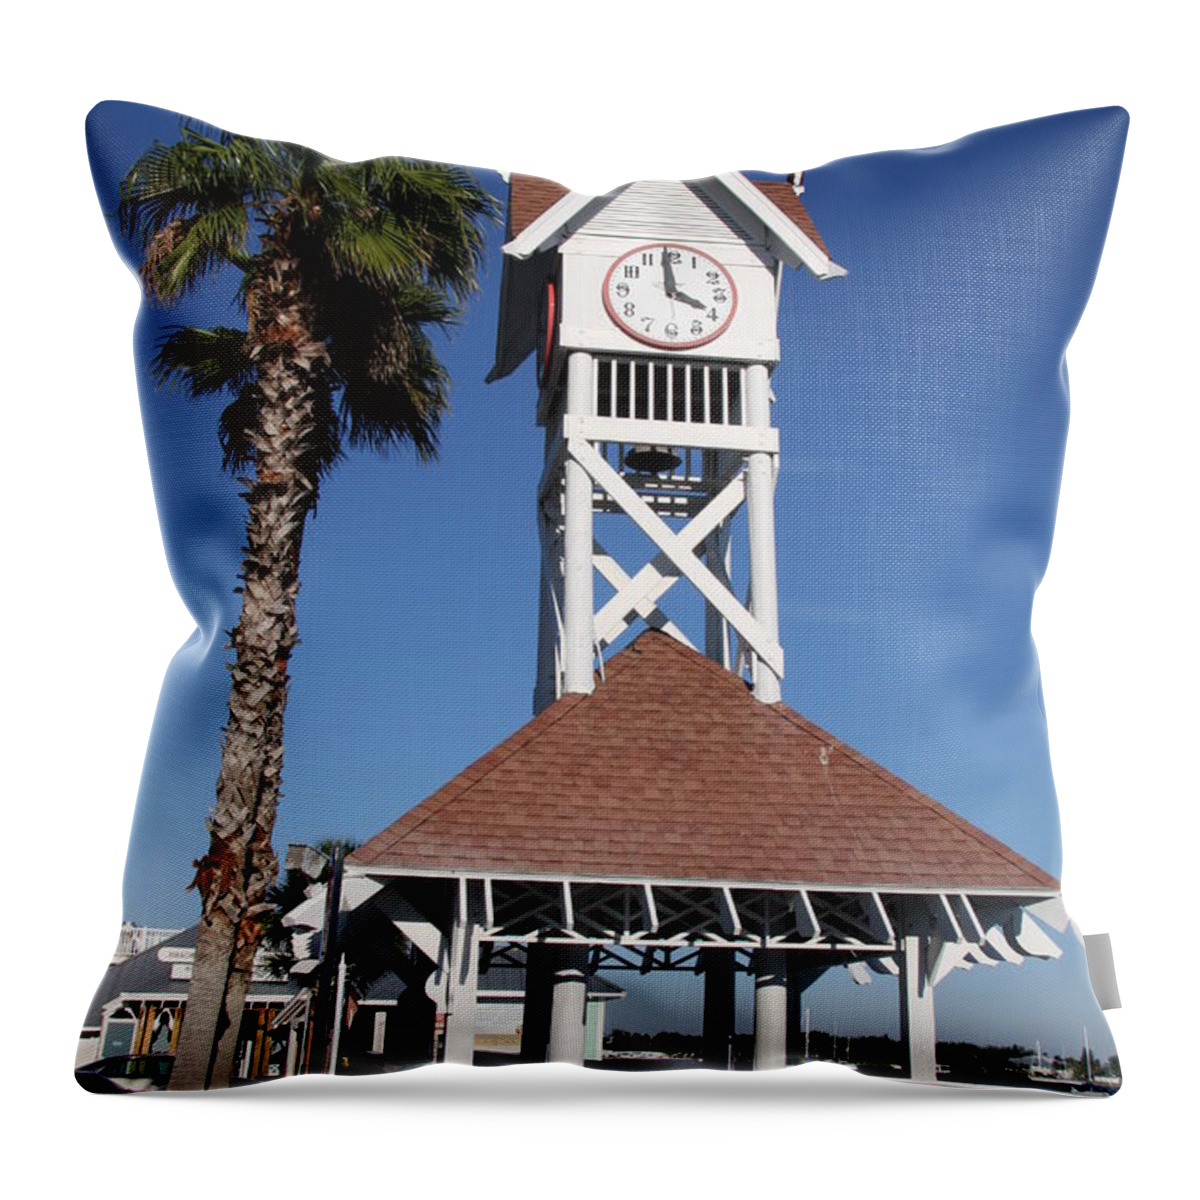 Pier Throw Pillow featuring the photograph Bridge Street Pier And Clocktower by Christiane Schulze Art And Photography